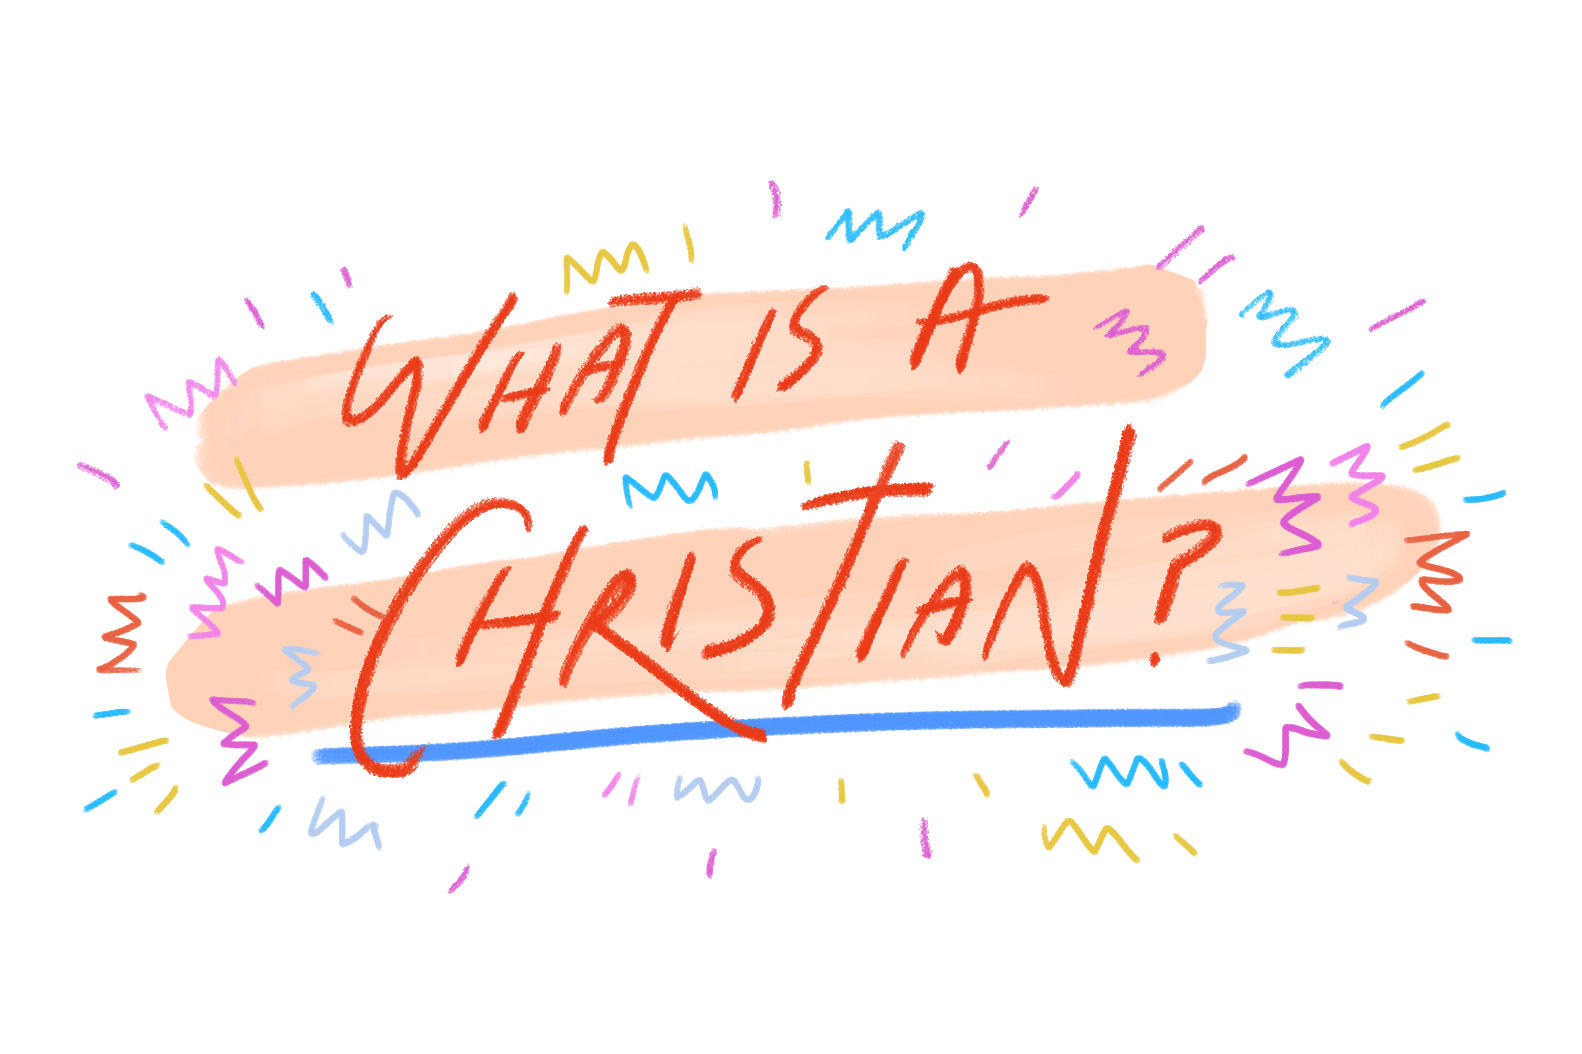 What is a christian